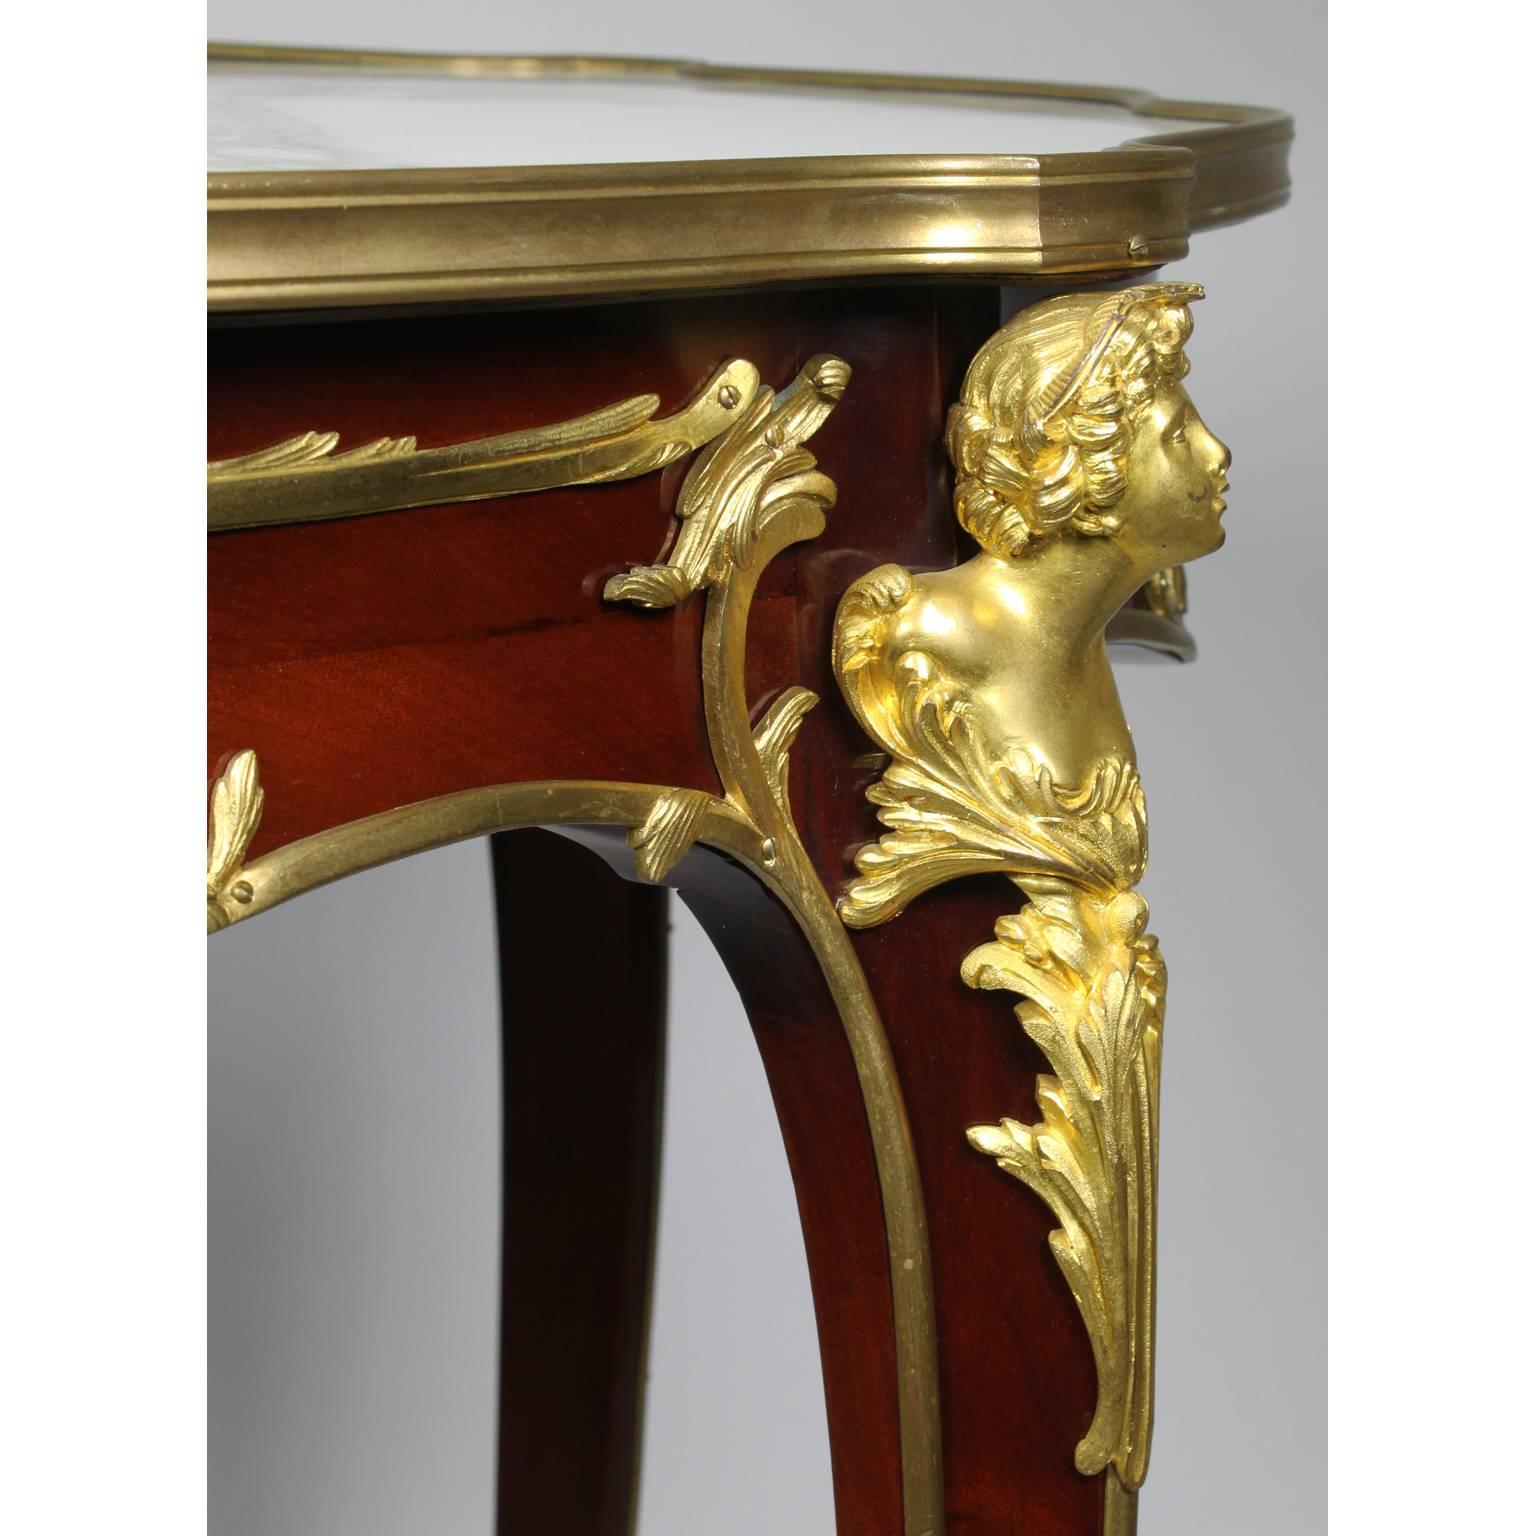 Early 20th Century Louis XV Style Figural Gilt-Bronze Mounted Guèridon Table, F. Linke Attributed